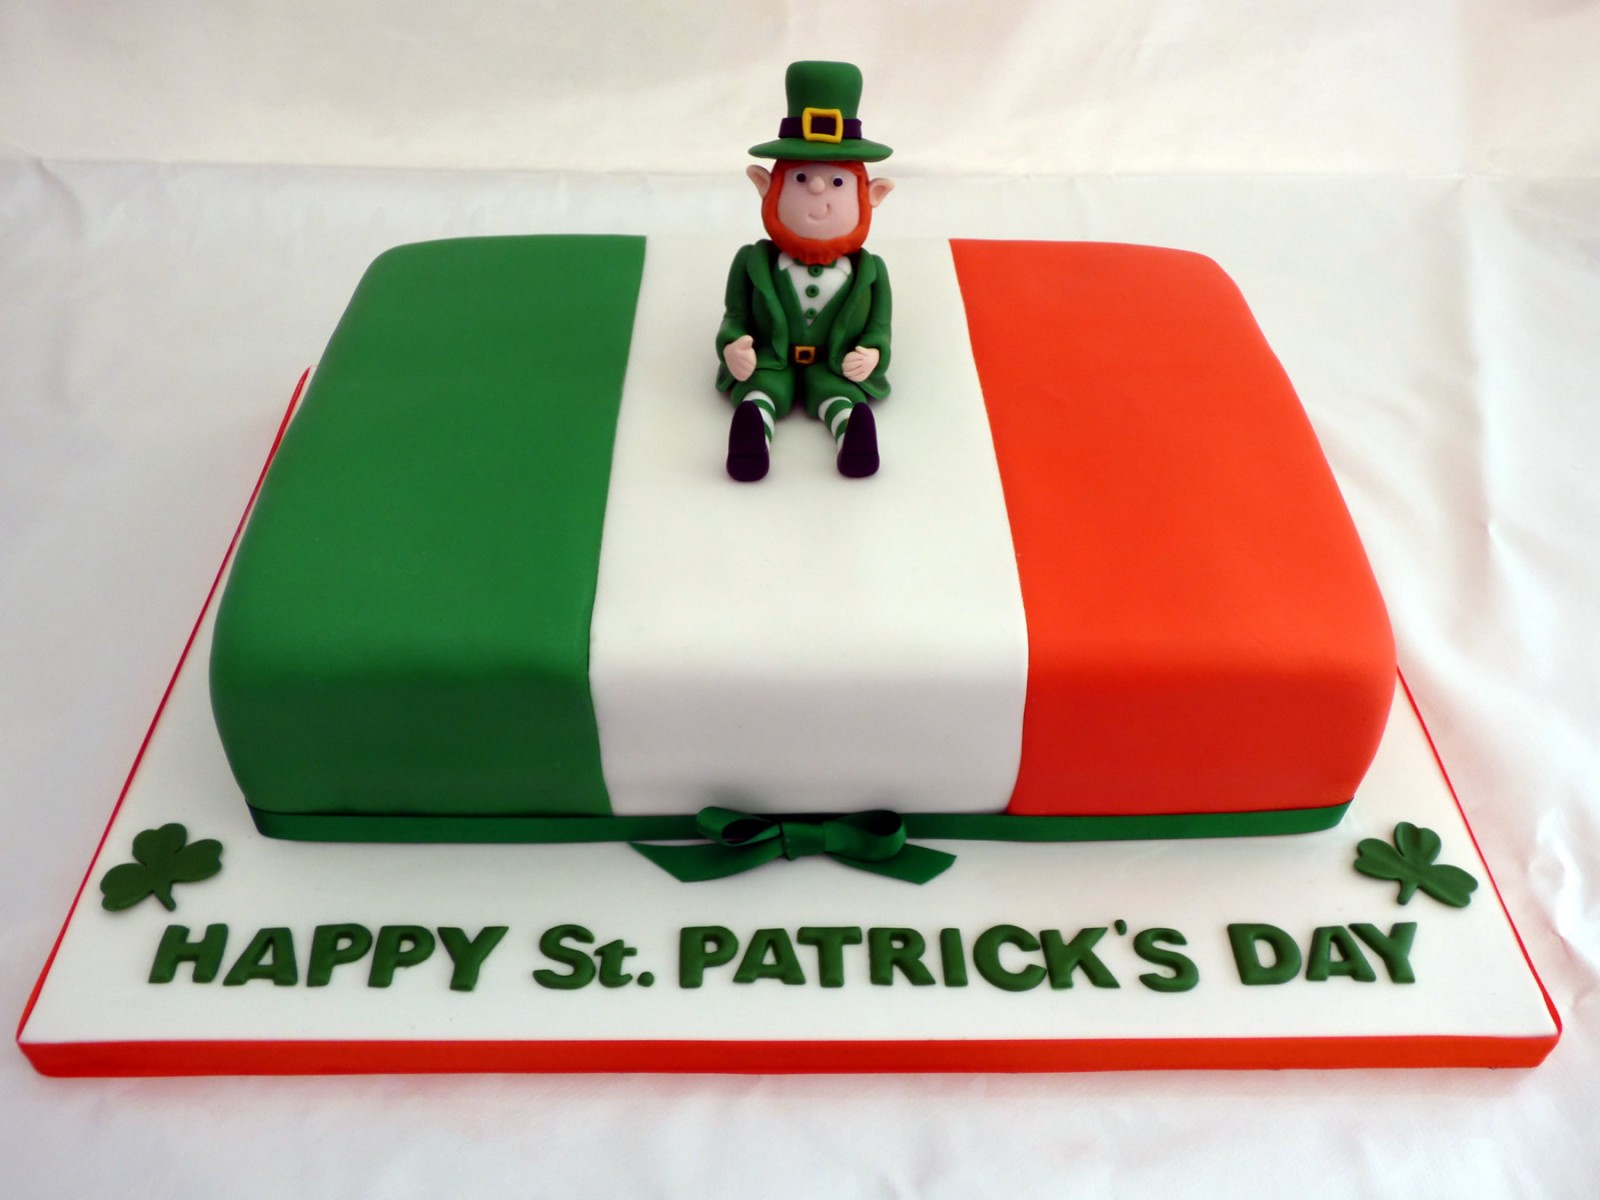 DIY St. Patrick's Day Cake: A Festive Home Improvement For Your Kitchen